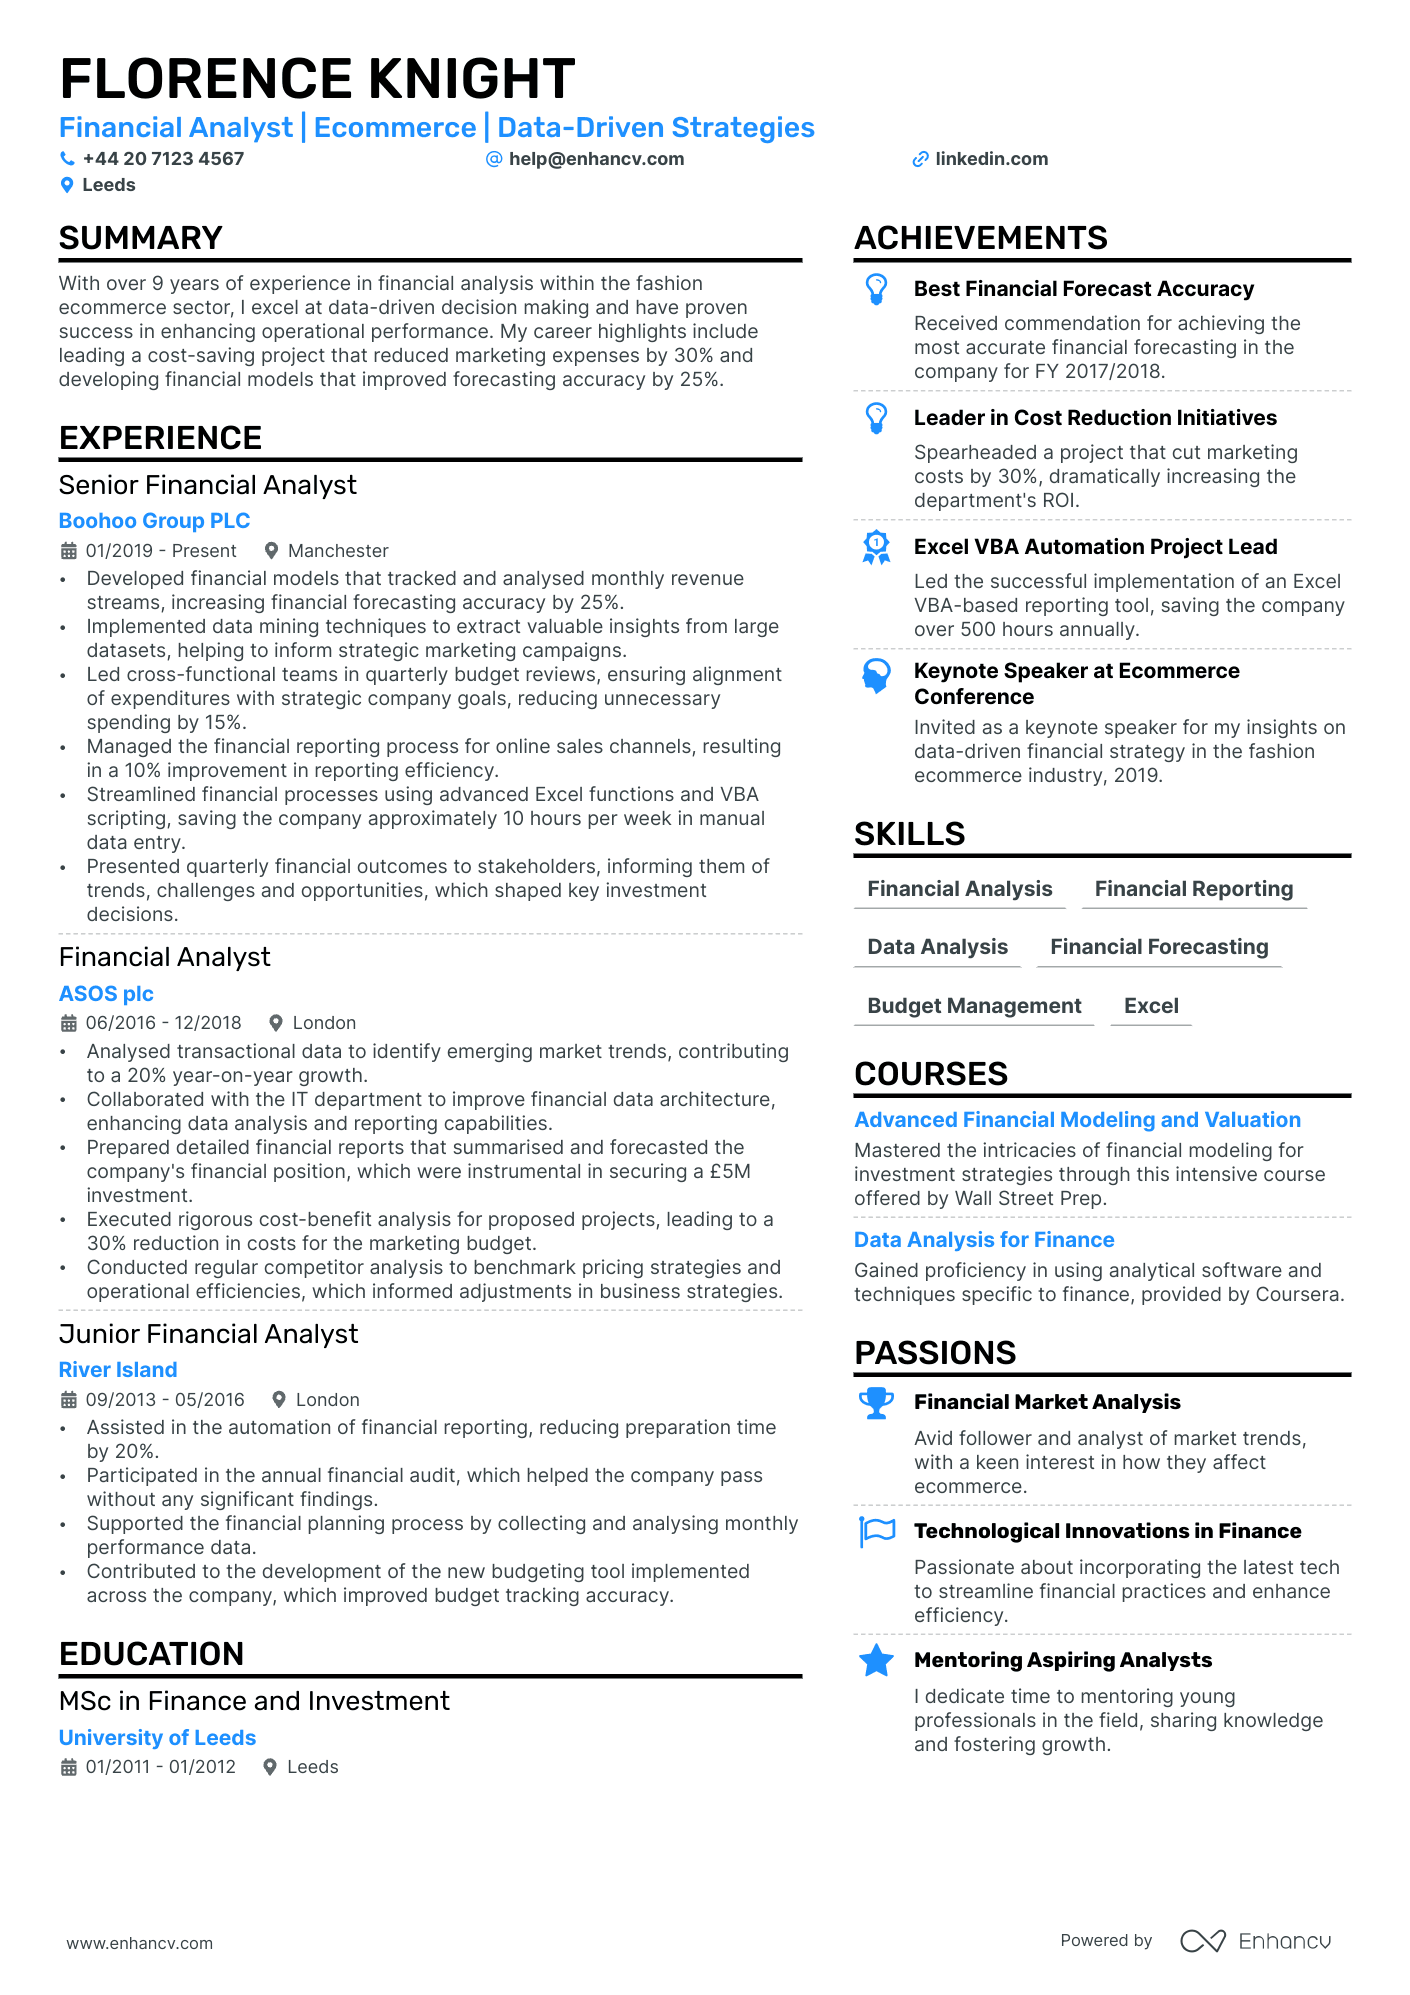 Financial Analyst cv example